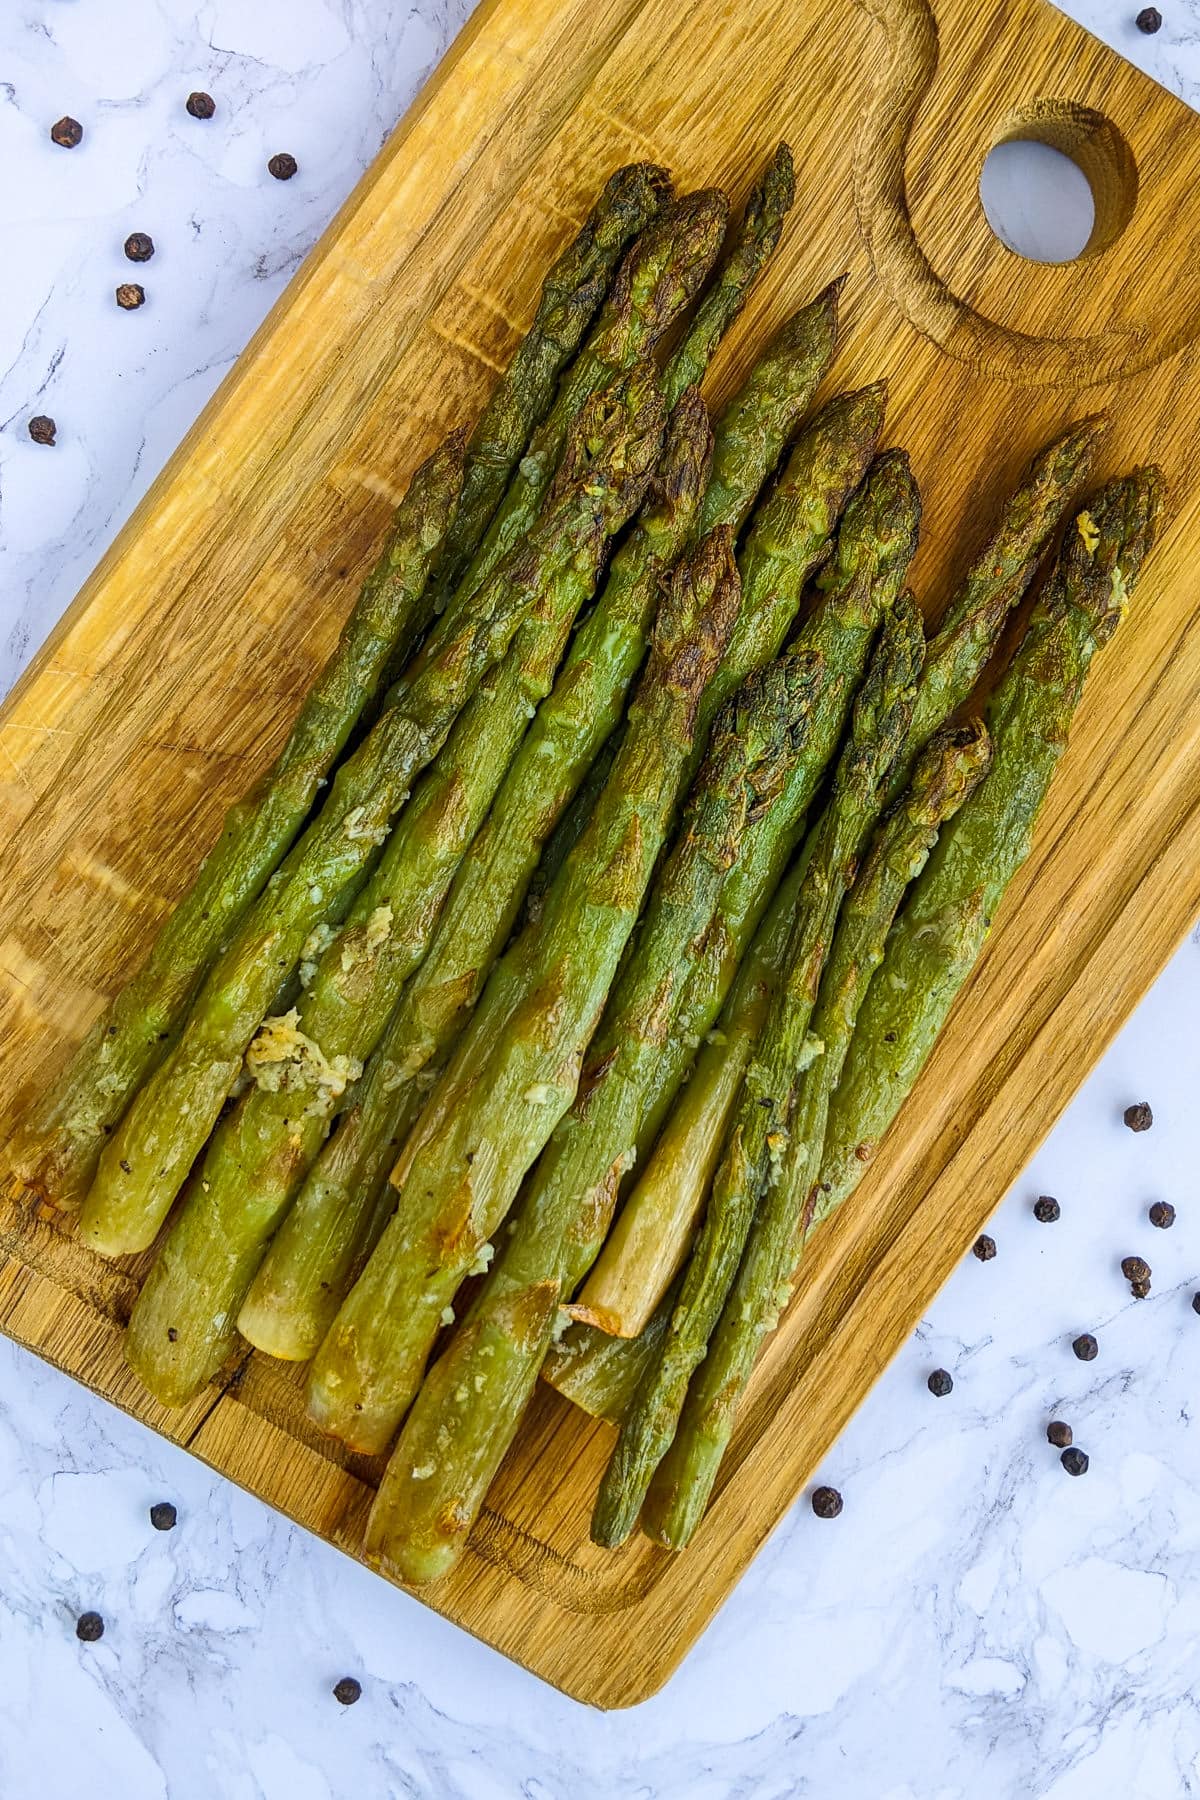 Wooden Cutting board with asparagus roasted in air fryer.